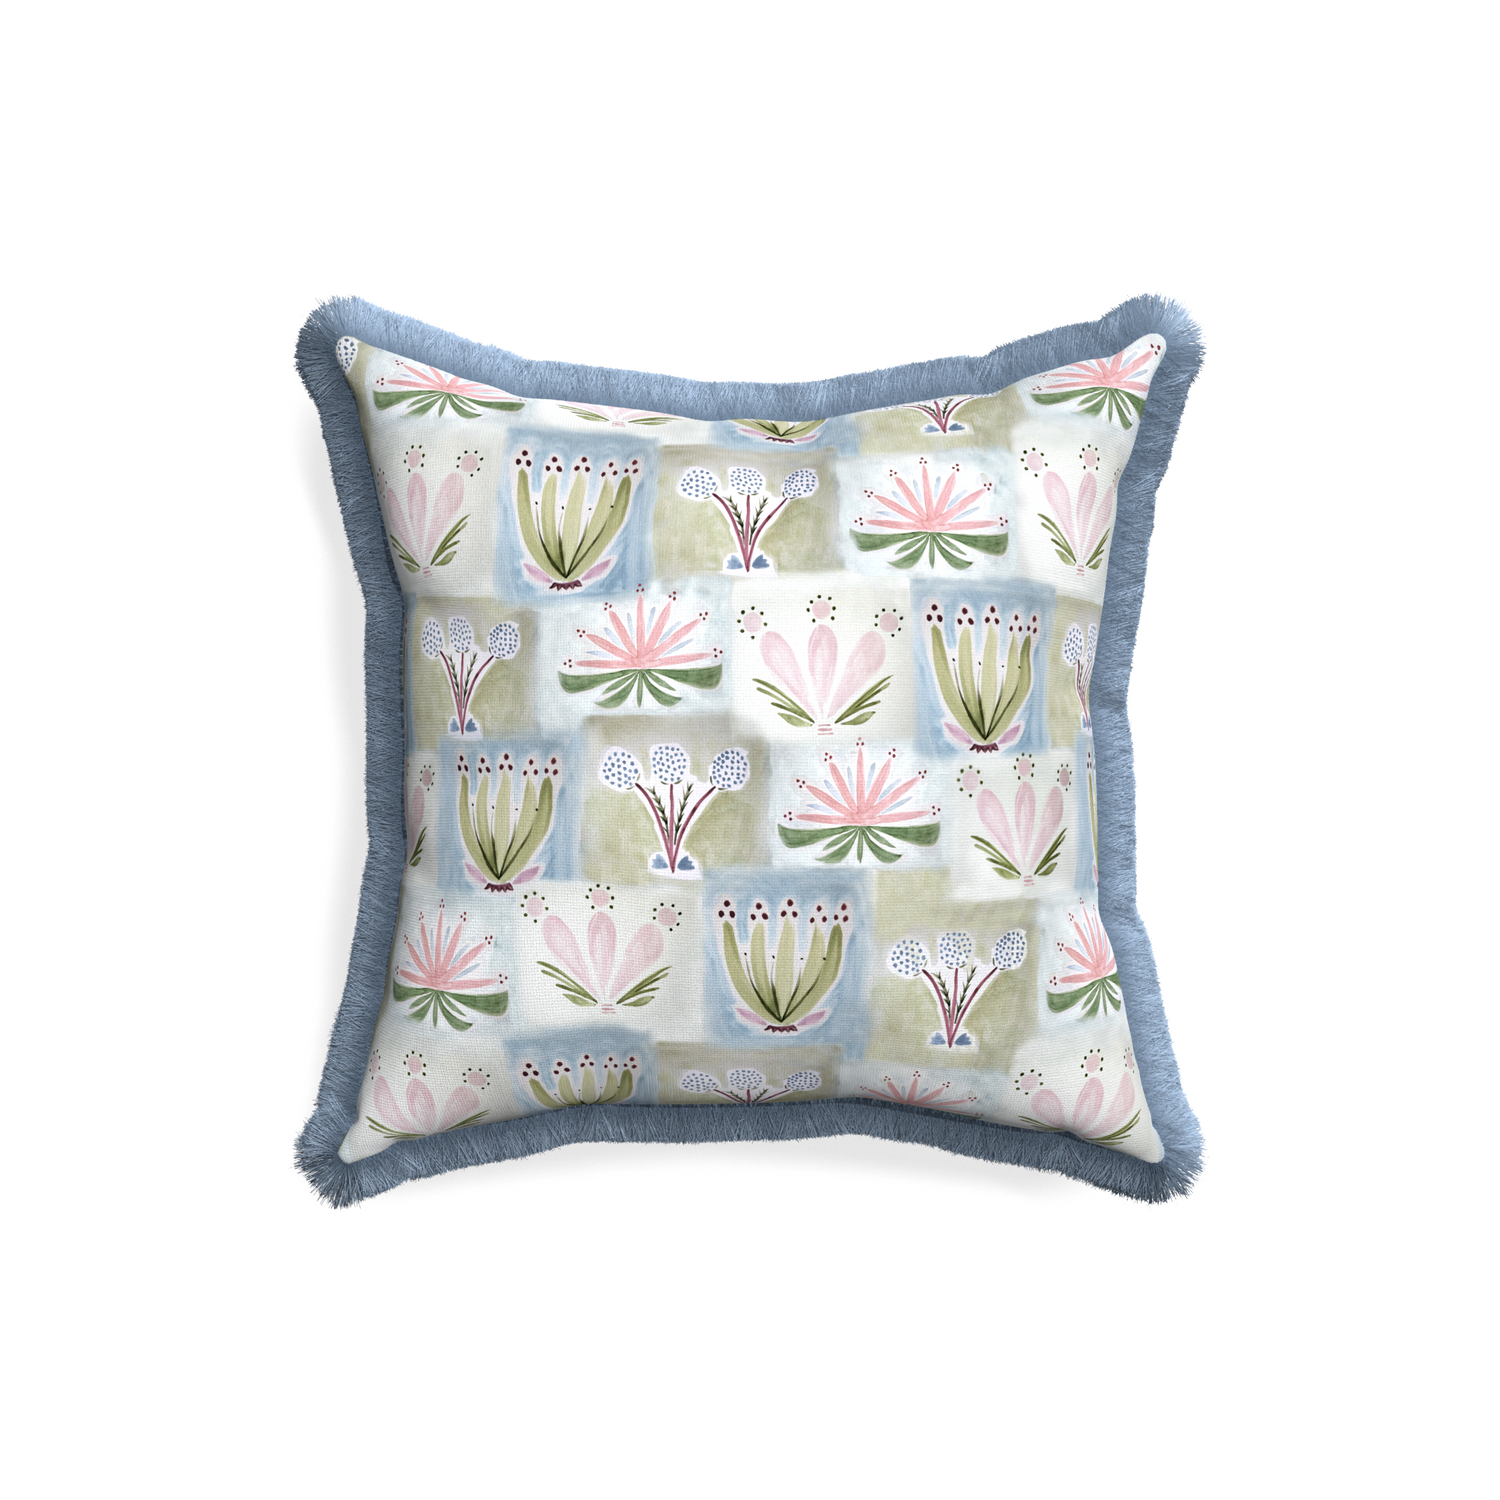 18-square harper custom hand-painted floralpillow with sky fringe on white background